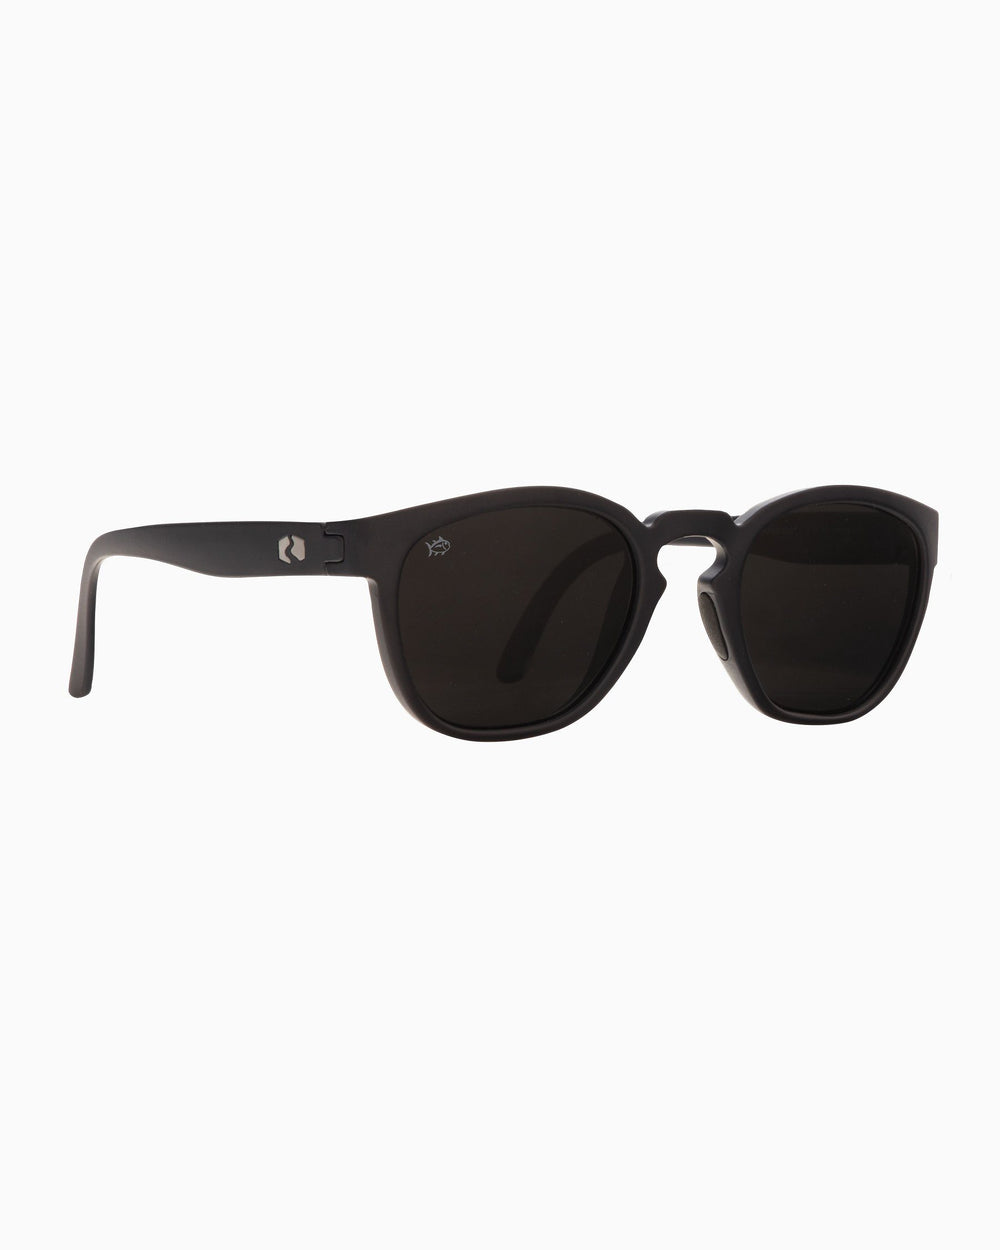 The side of the Rheos Seabrooks Sunglasses by Southern Tide - Gunmetal